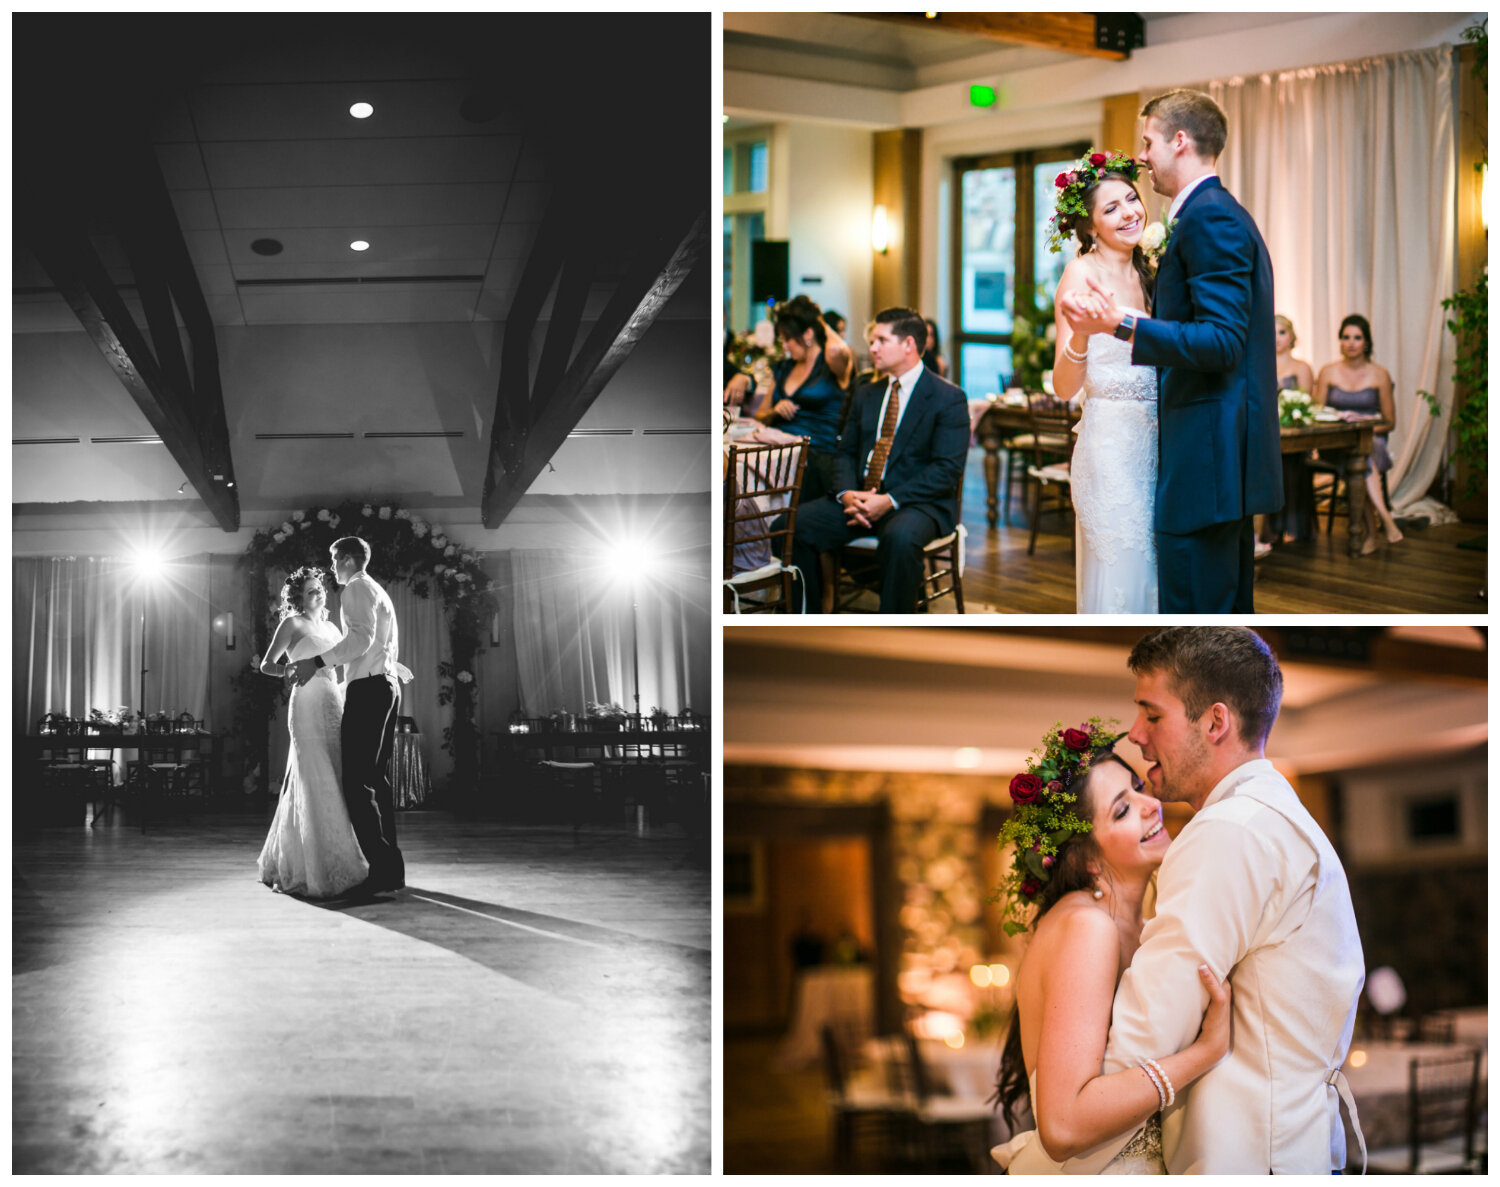  Bride and groom first dance at Highlands Ranch Mansion.&nbsp;&nbsp;  hotographed by JMGant Photography, Denver Colorado wedding photographer.&nbsp; 